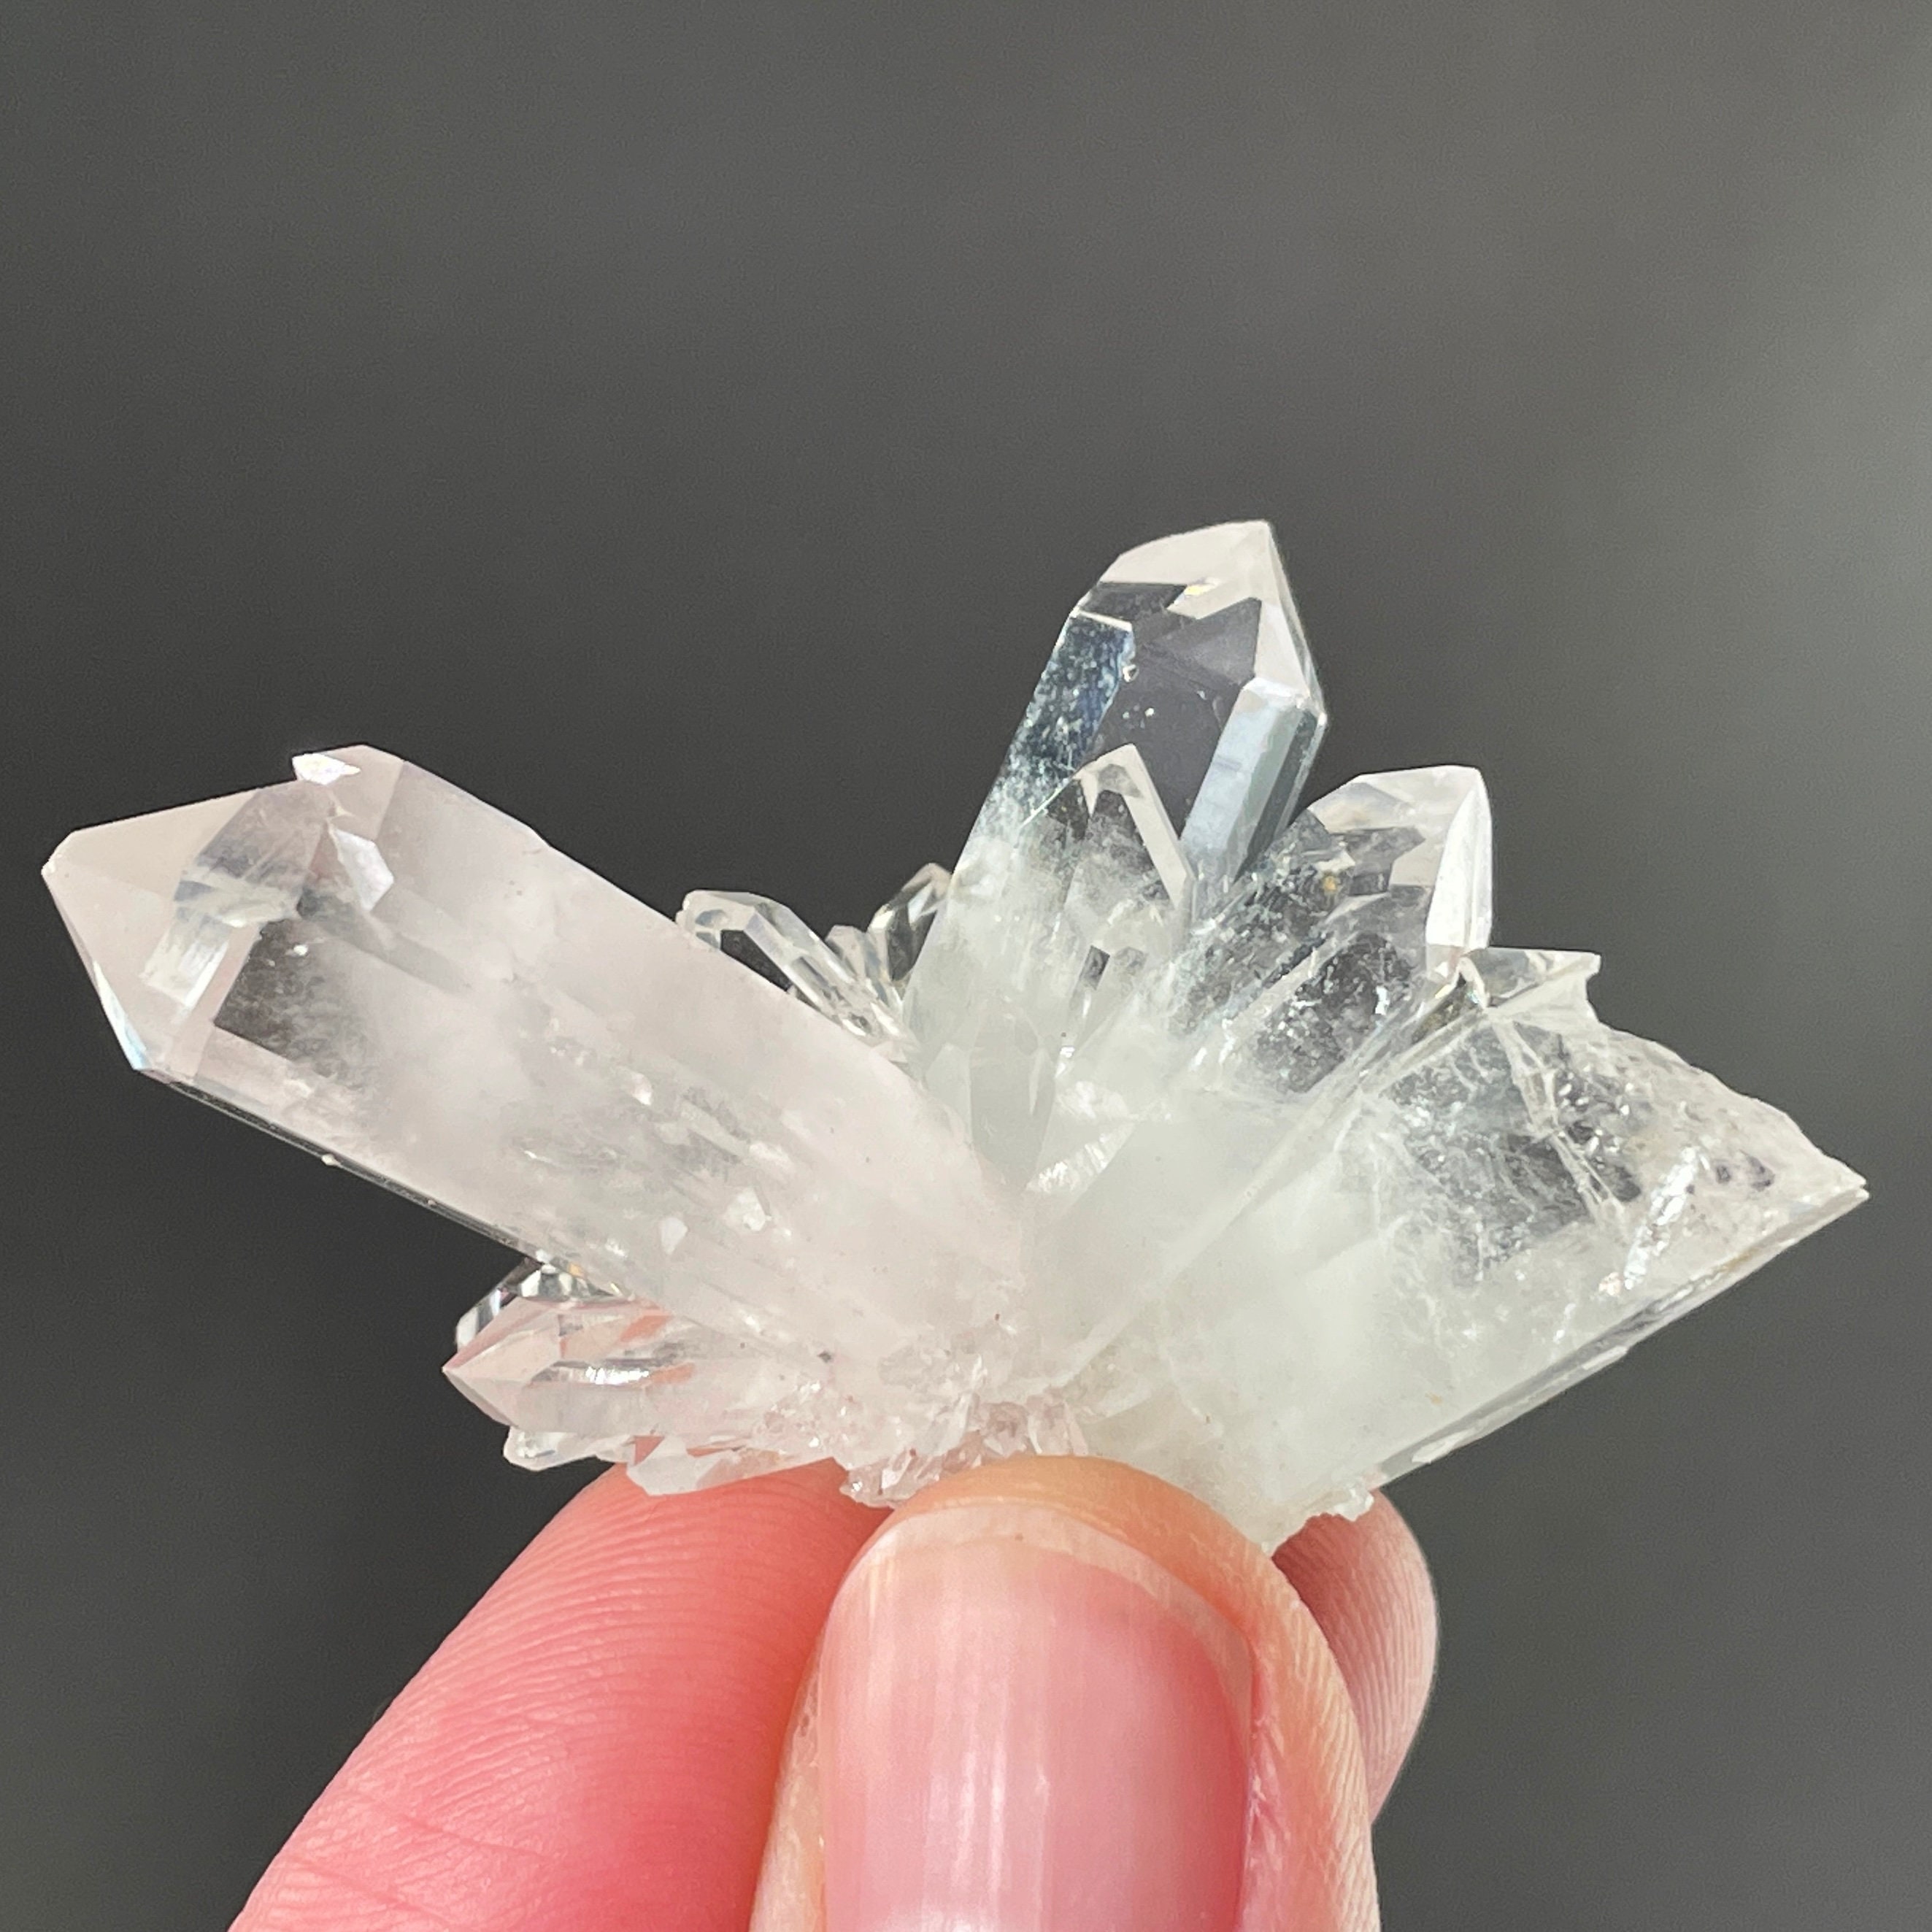 Brandberg from Namibia double terminated crystal point with polished window and a rainbow Manifestation crystal